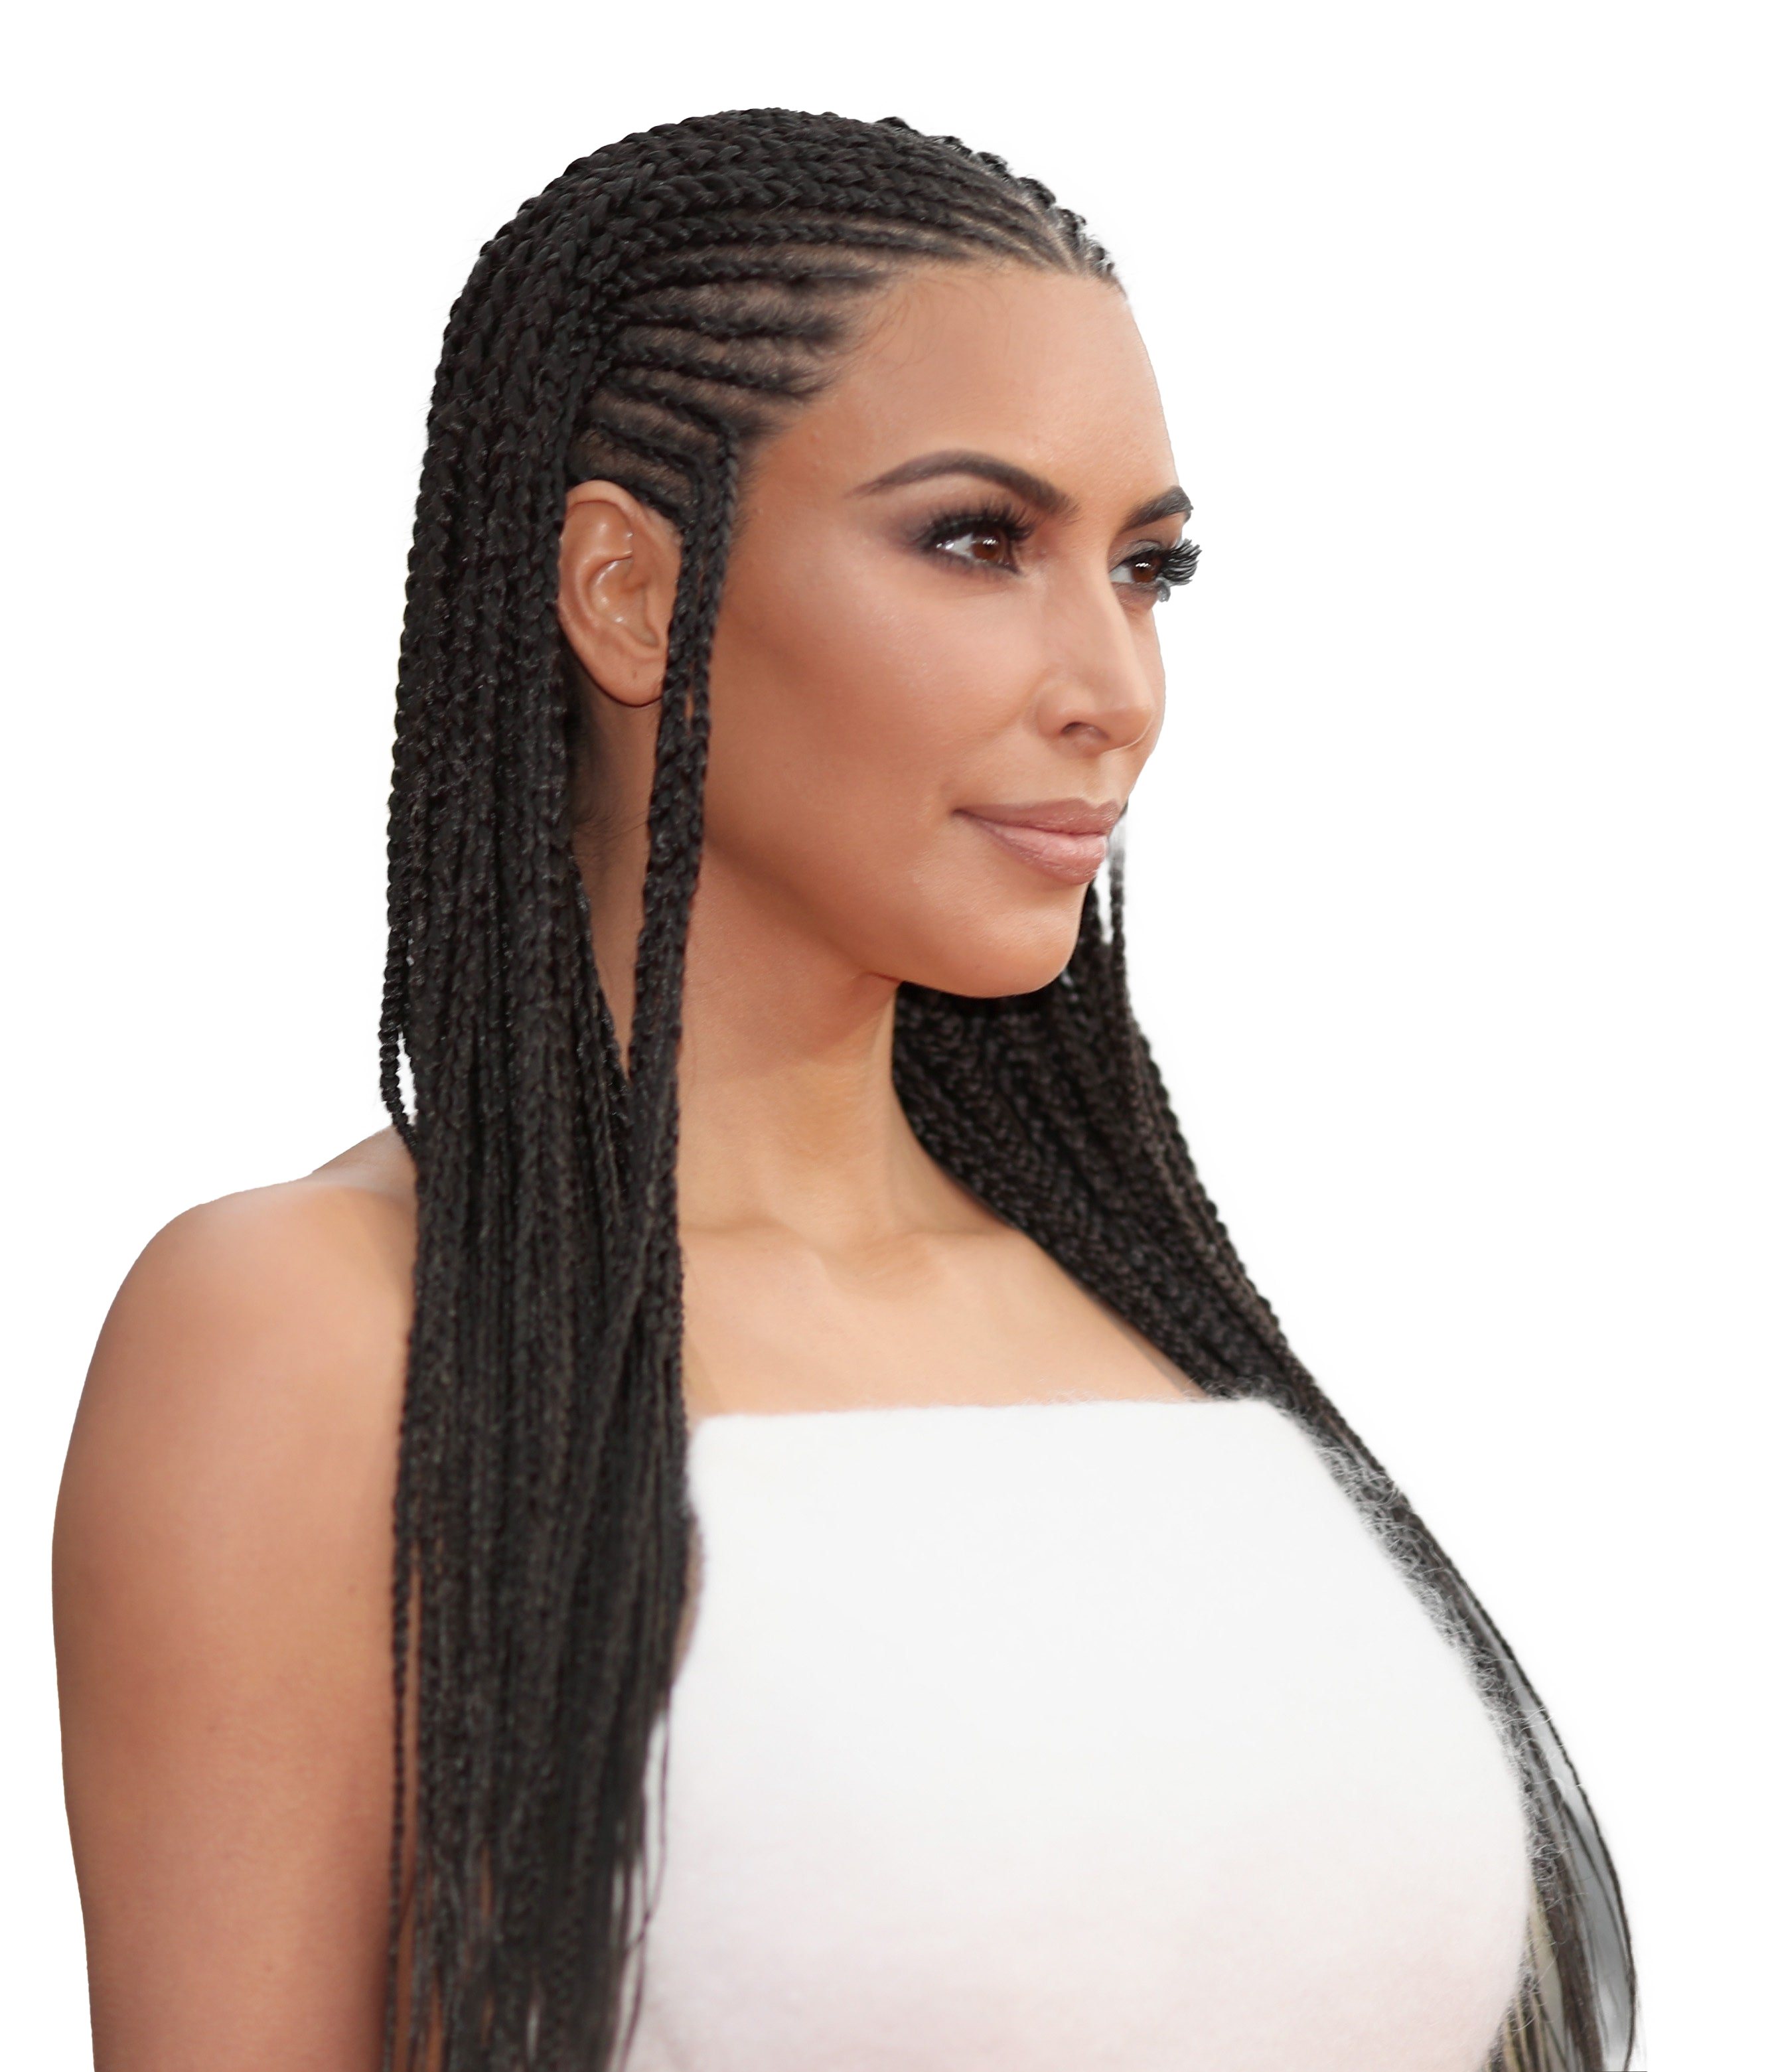 Braids Hairstyle PNG Pic